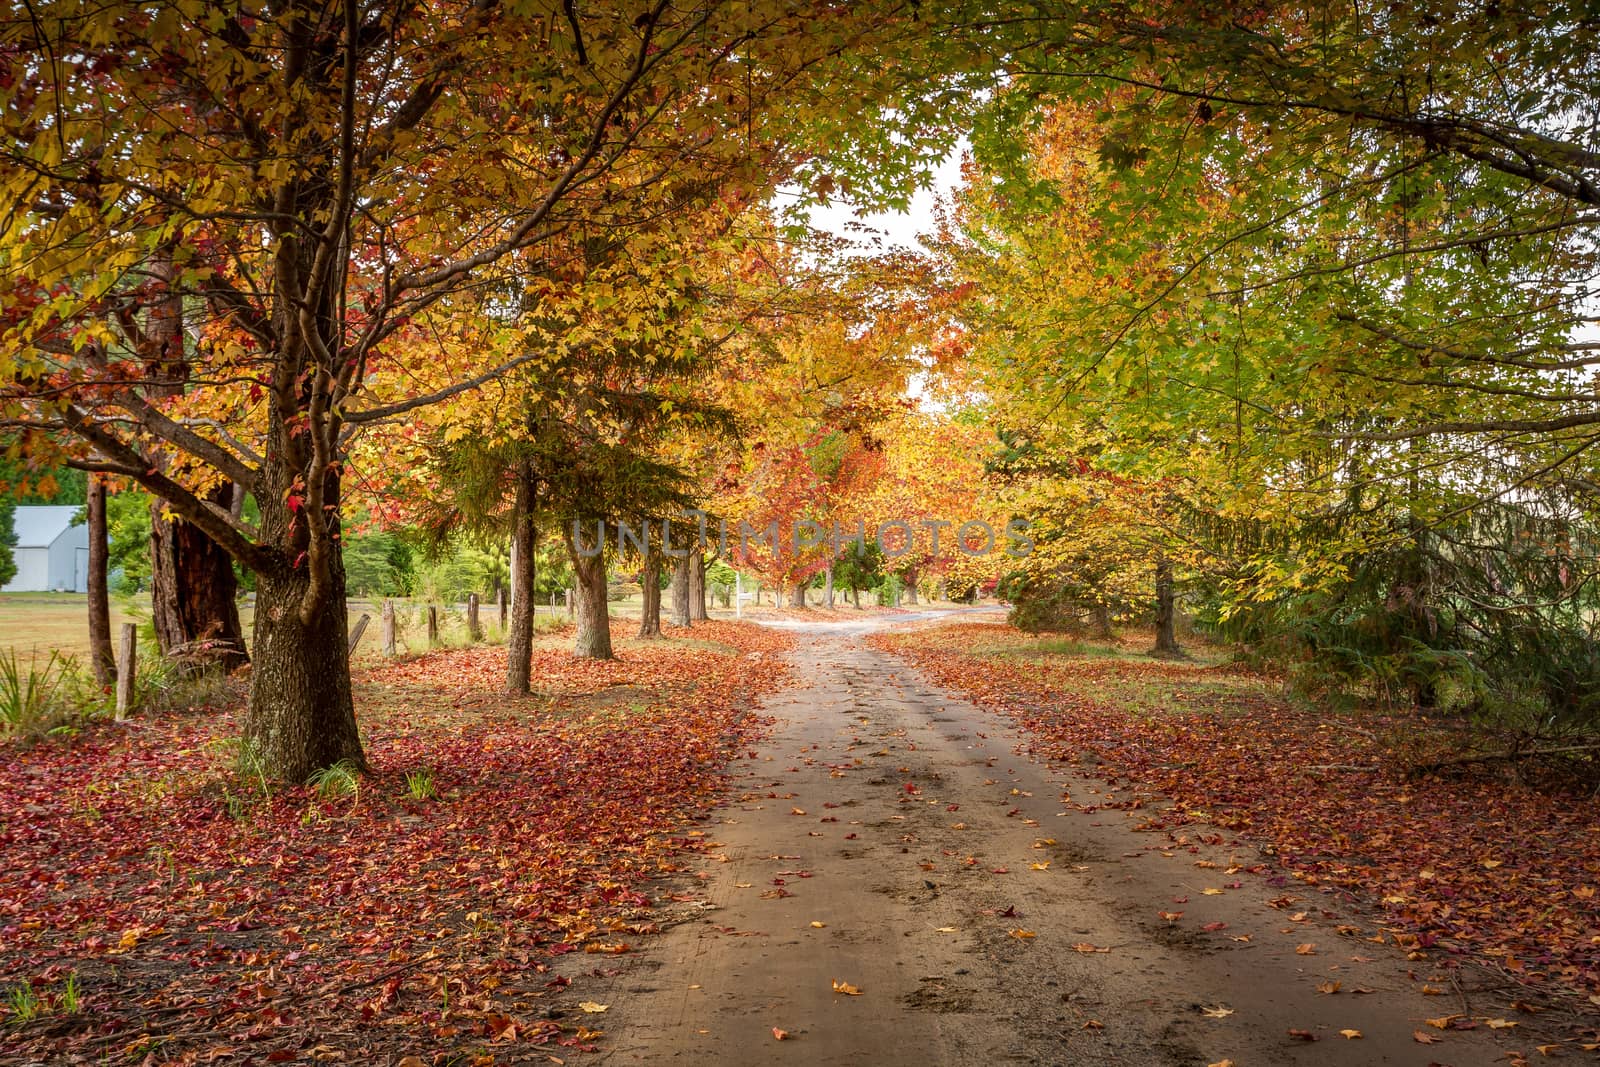 Autumn colours in the tree lined roads by lovleah